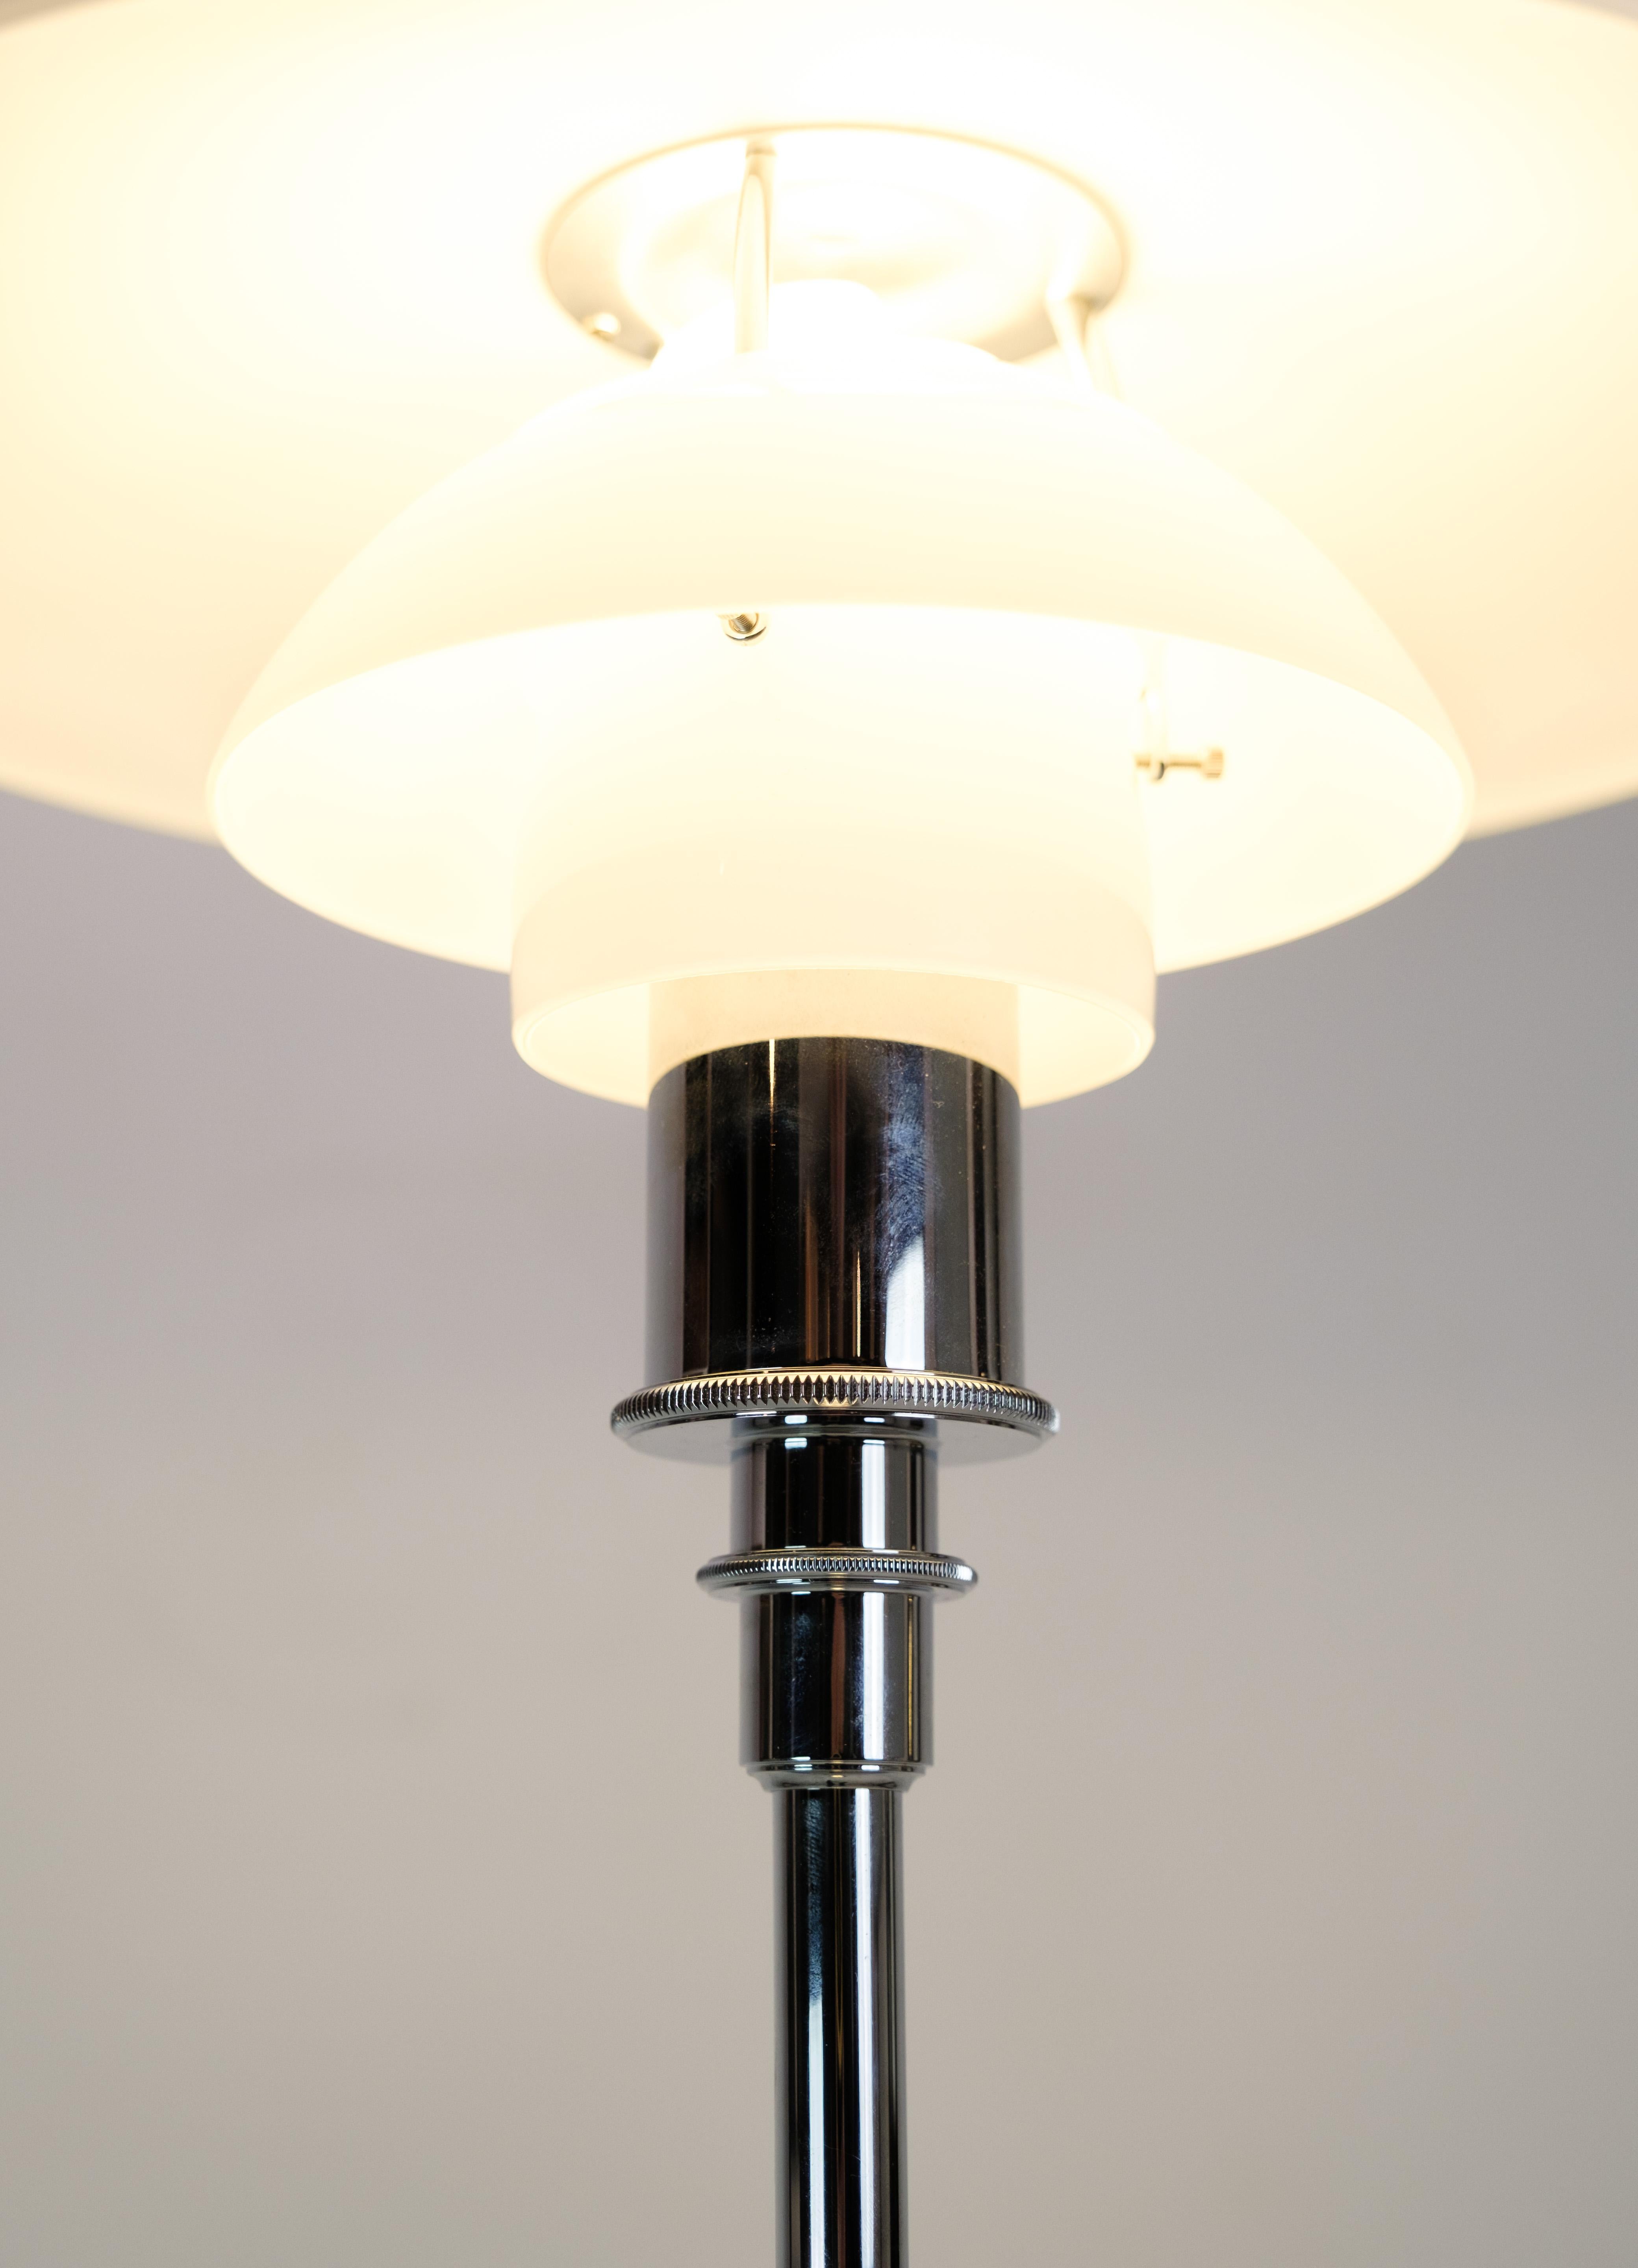 The floor lamp, Model 3½-2½, designed by Poul Henningsen and produced by Louis Poulsen in 1980, is a striking example of Danish lighting design. This model features a high-gloss chrome-plated frame, adding a touch of modern elegance to its sleek and